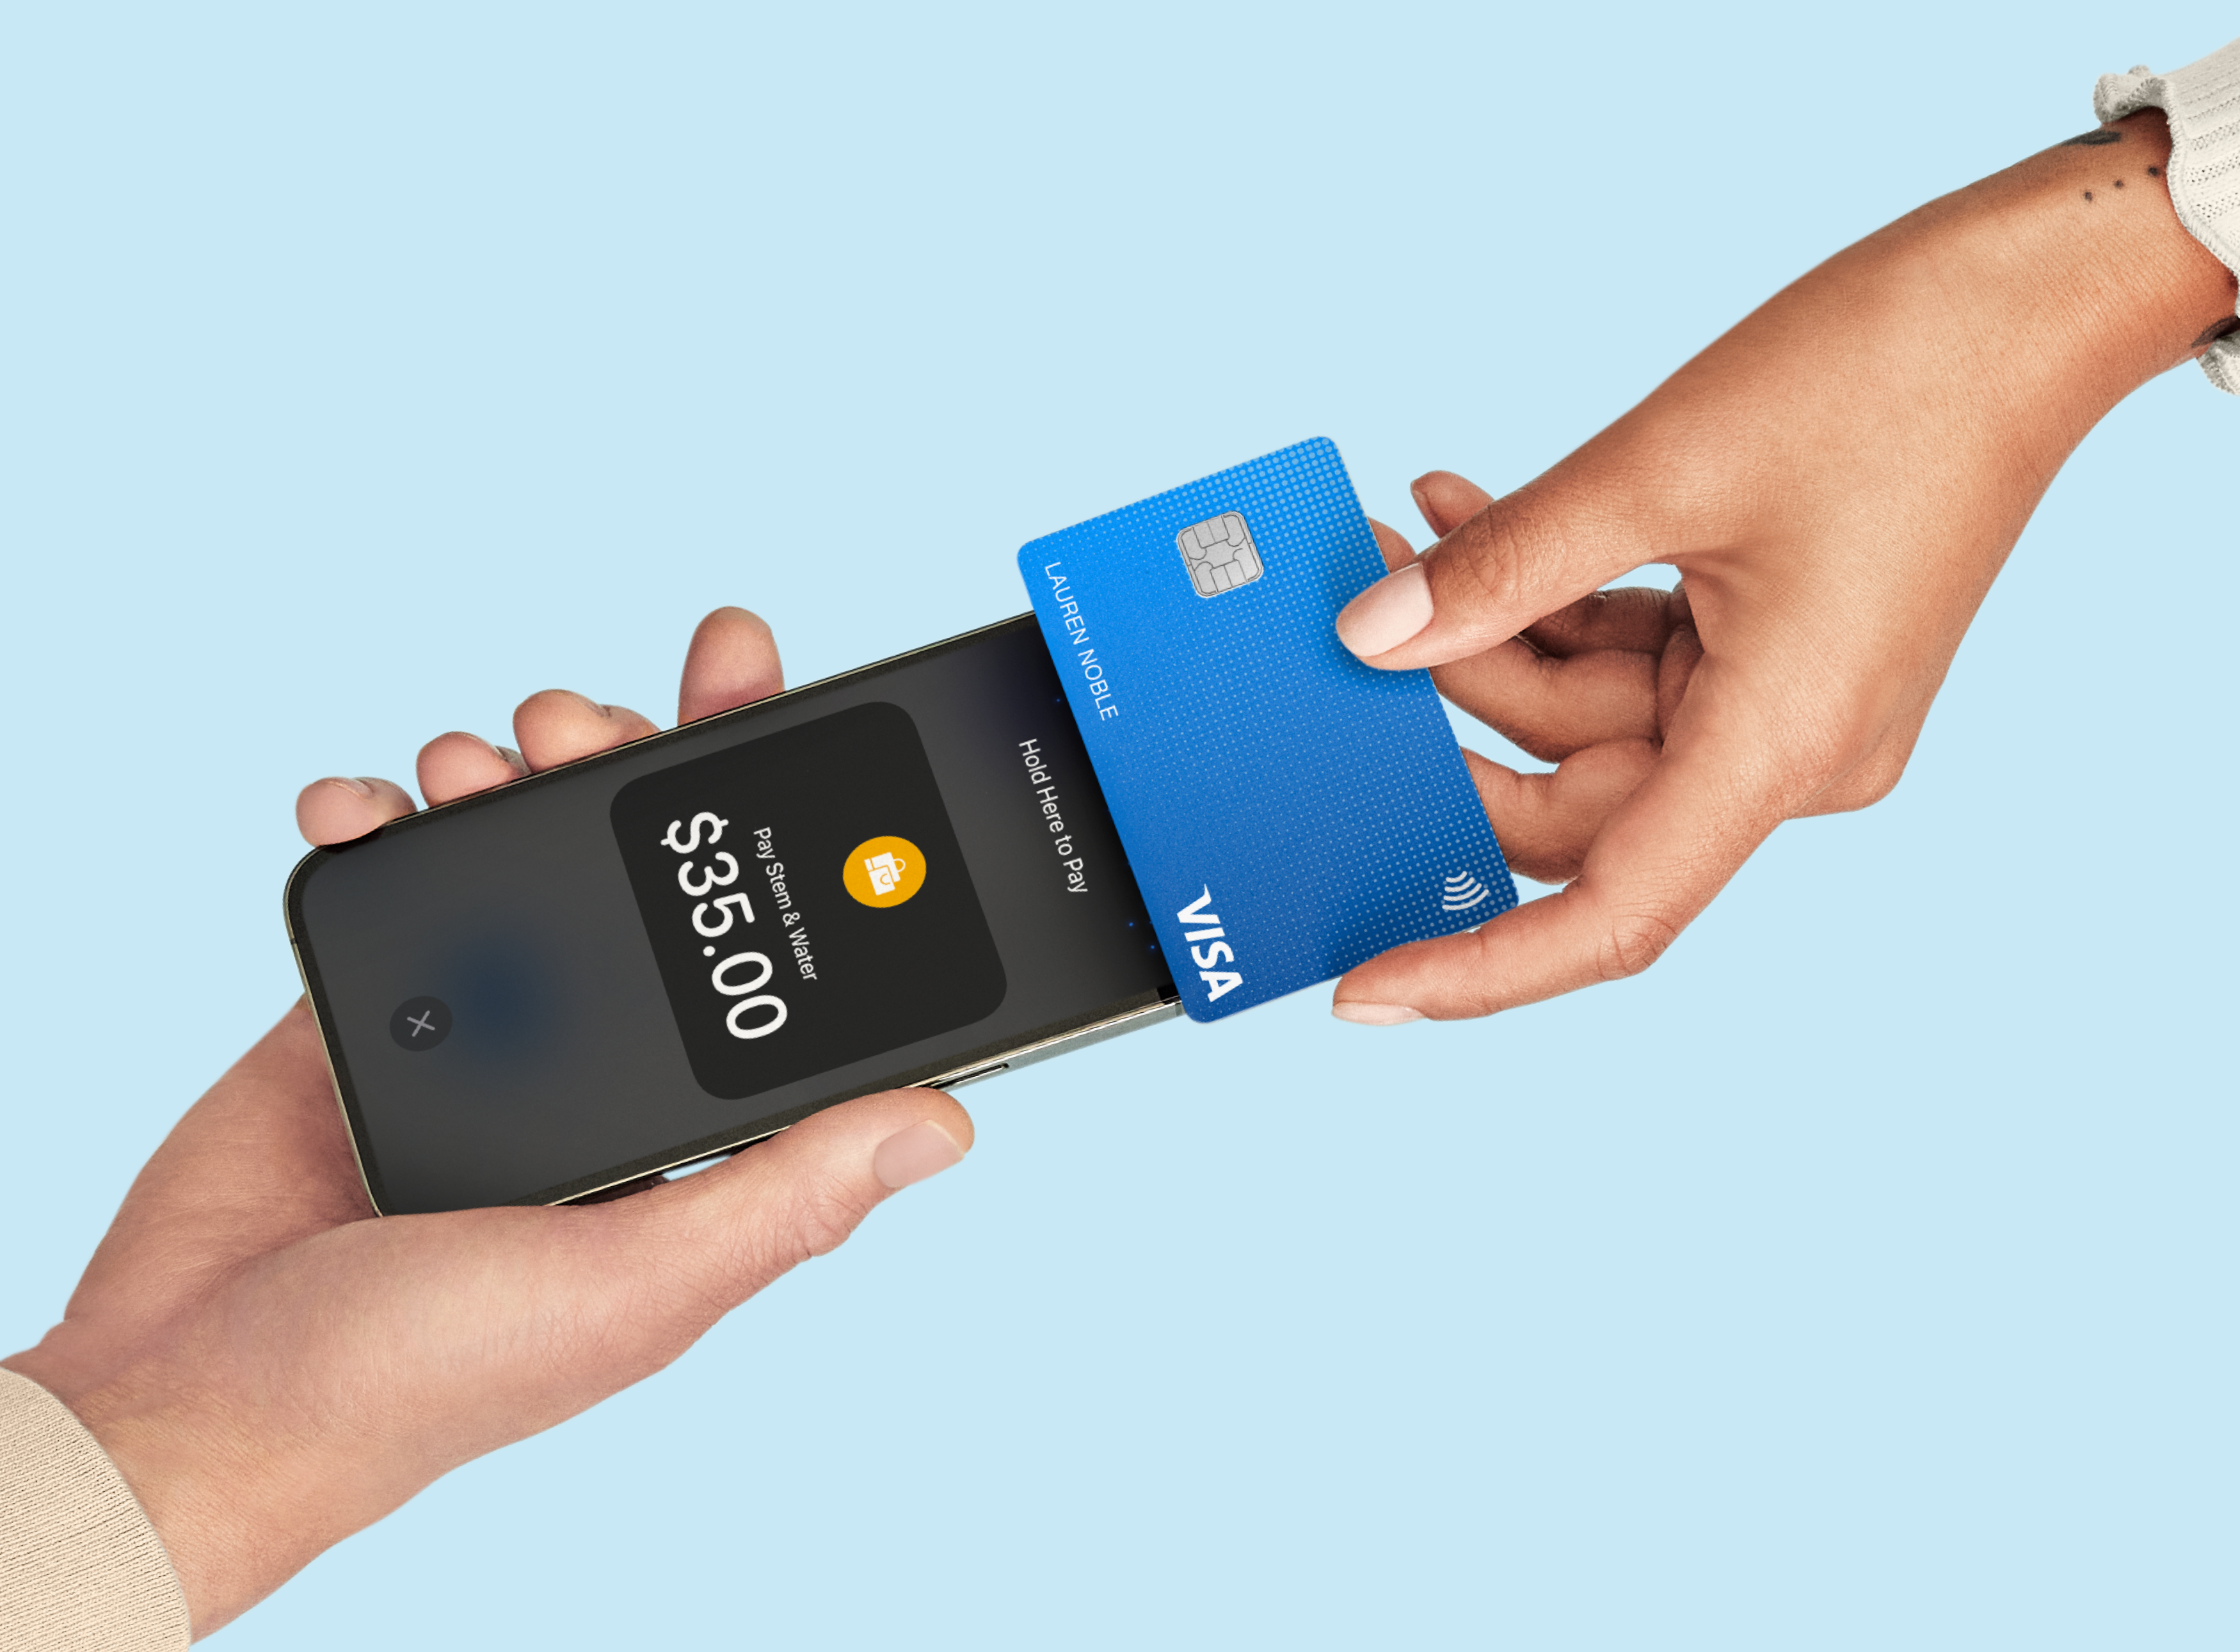 Block Introduces 'Tap To Pay' On Apple iPhone For Hasslefree Contactless Commerce